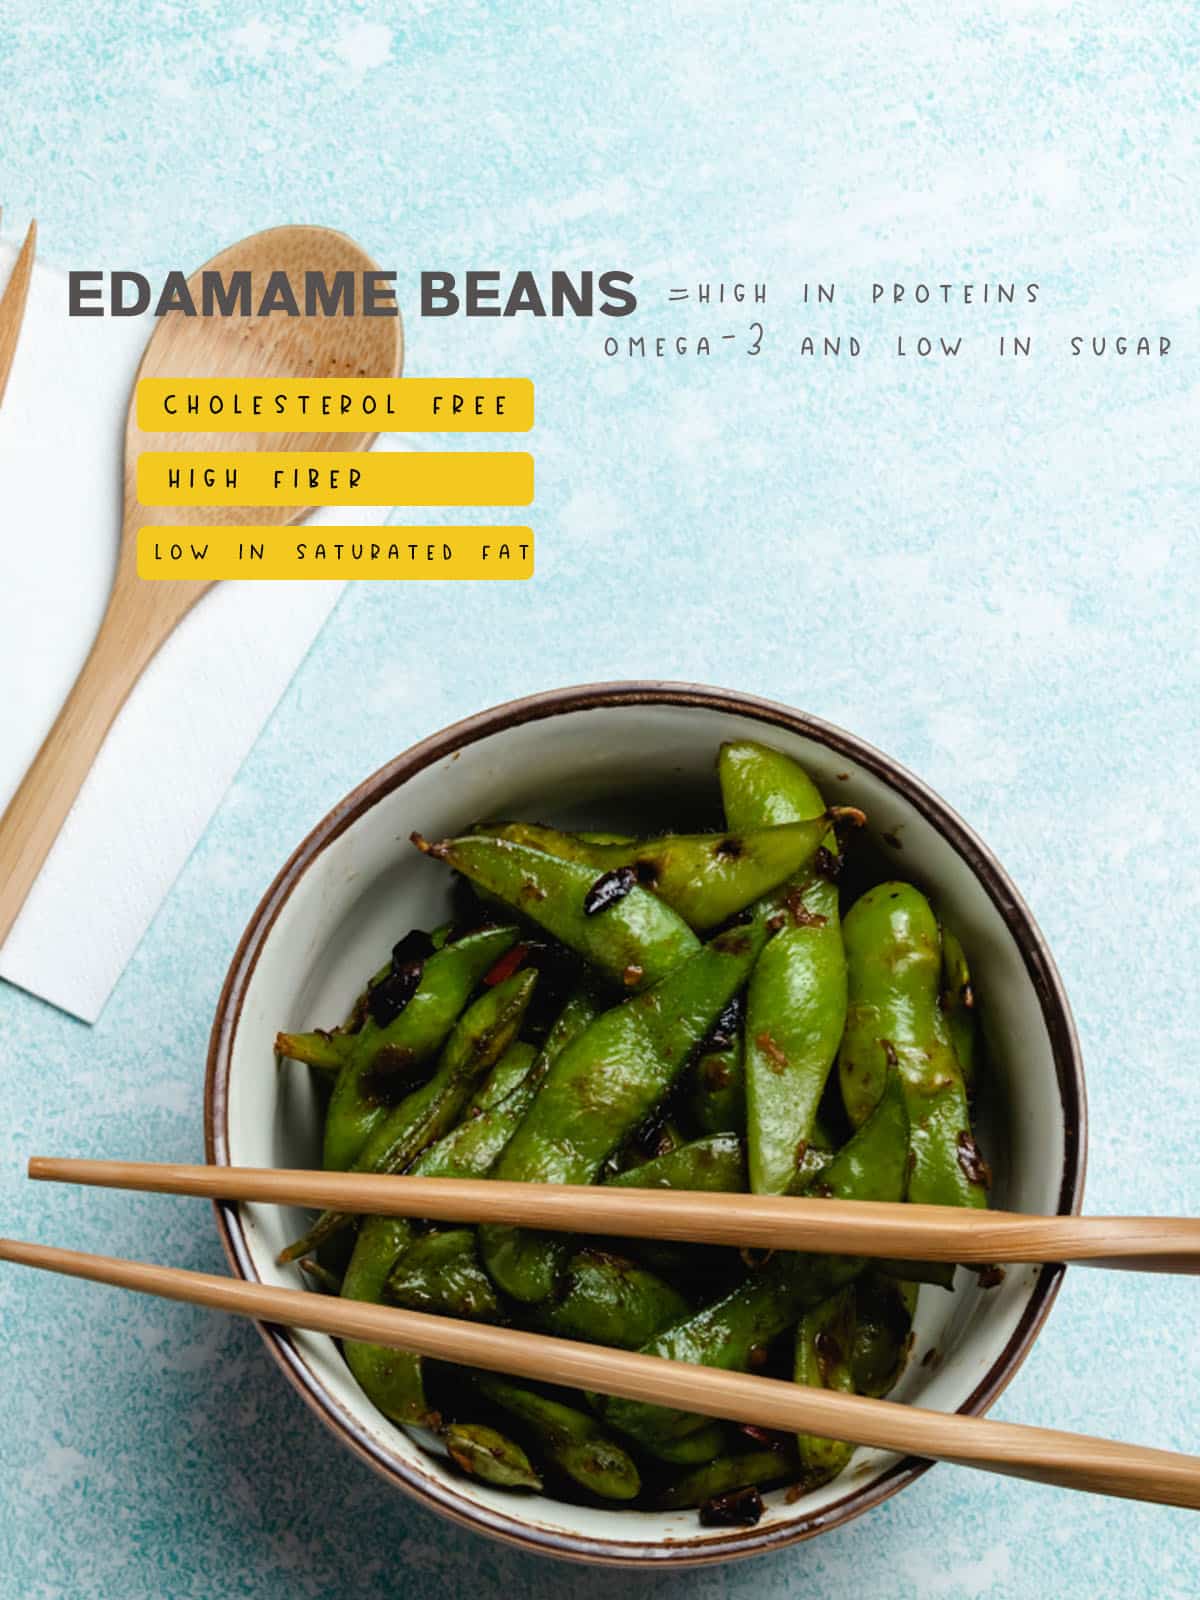 Some key distinctions set these two vegetables apart when comparing edamame vs. lima beans. Let's take a closer look at the differences between edamame vs lima beans.